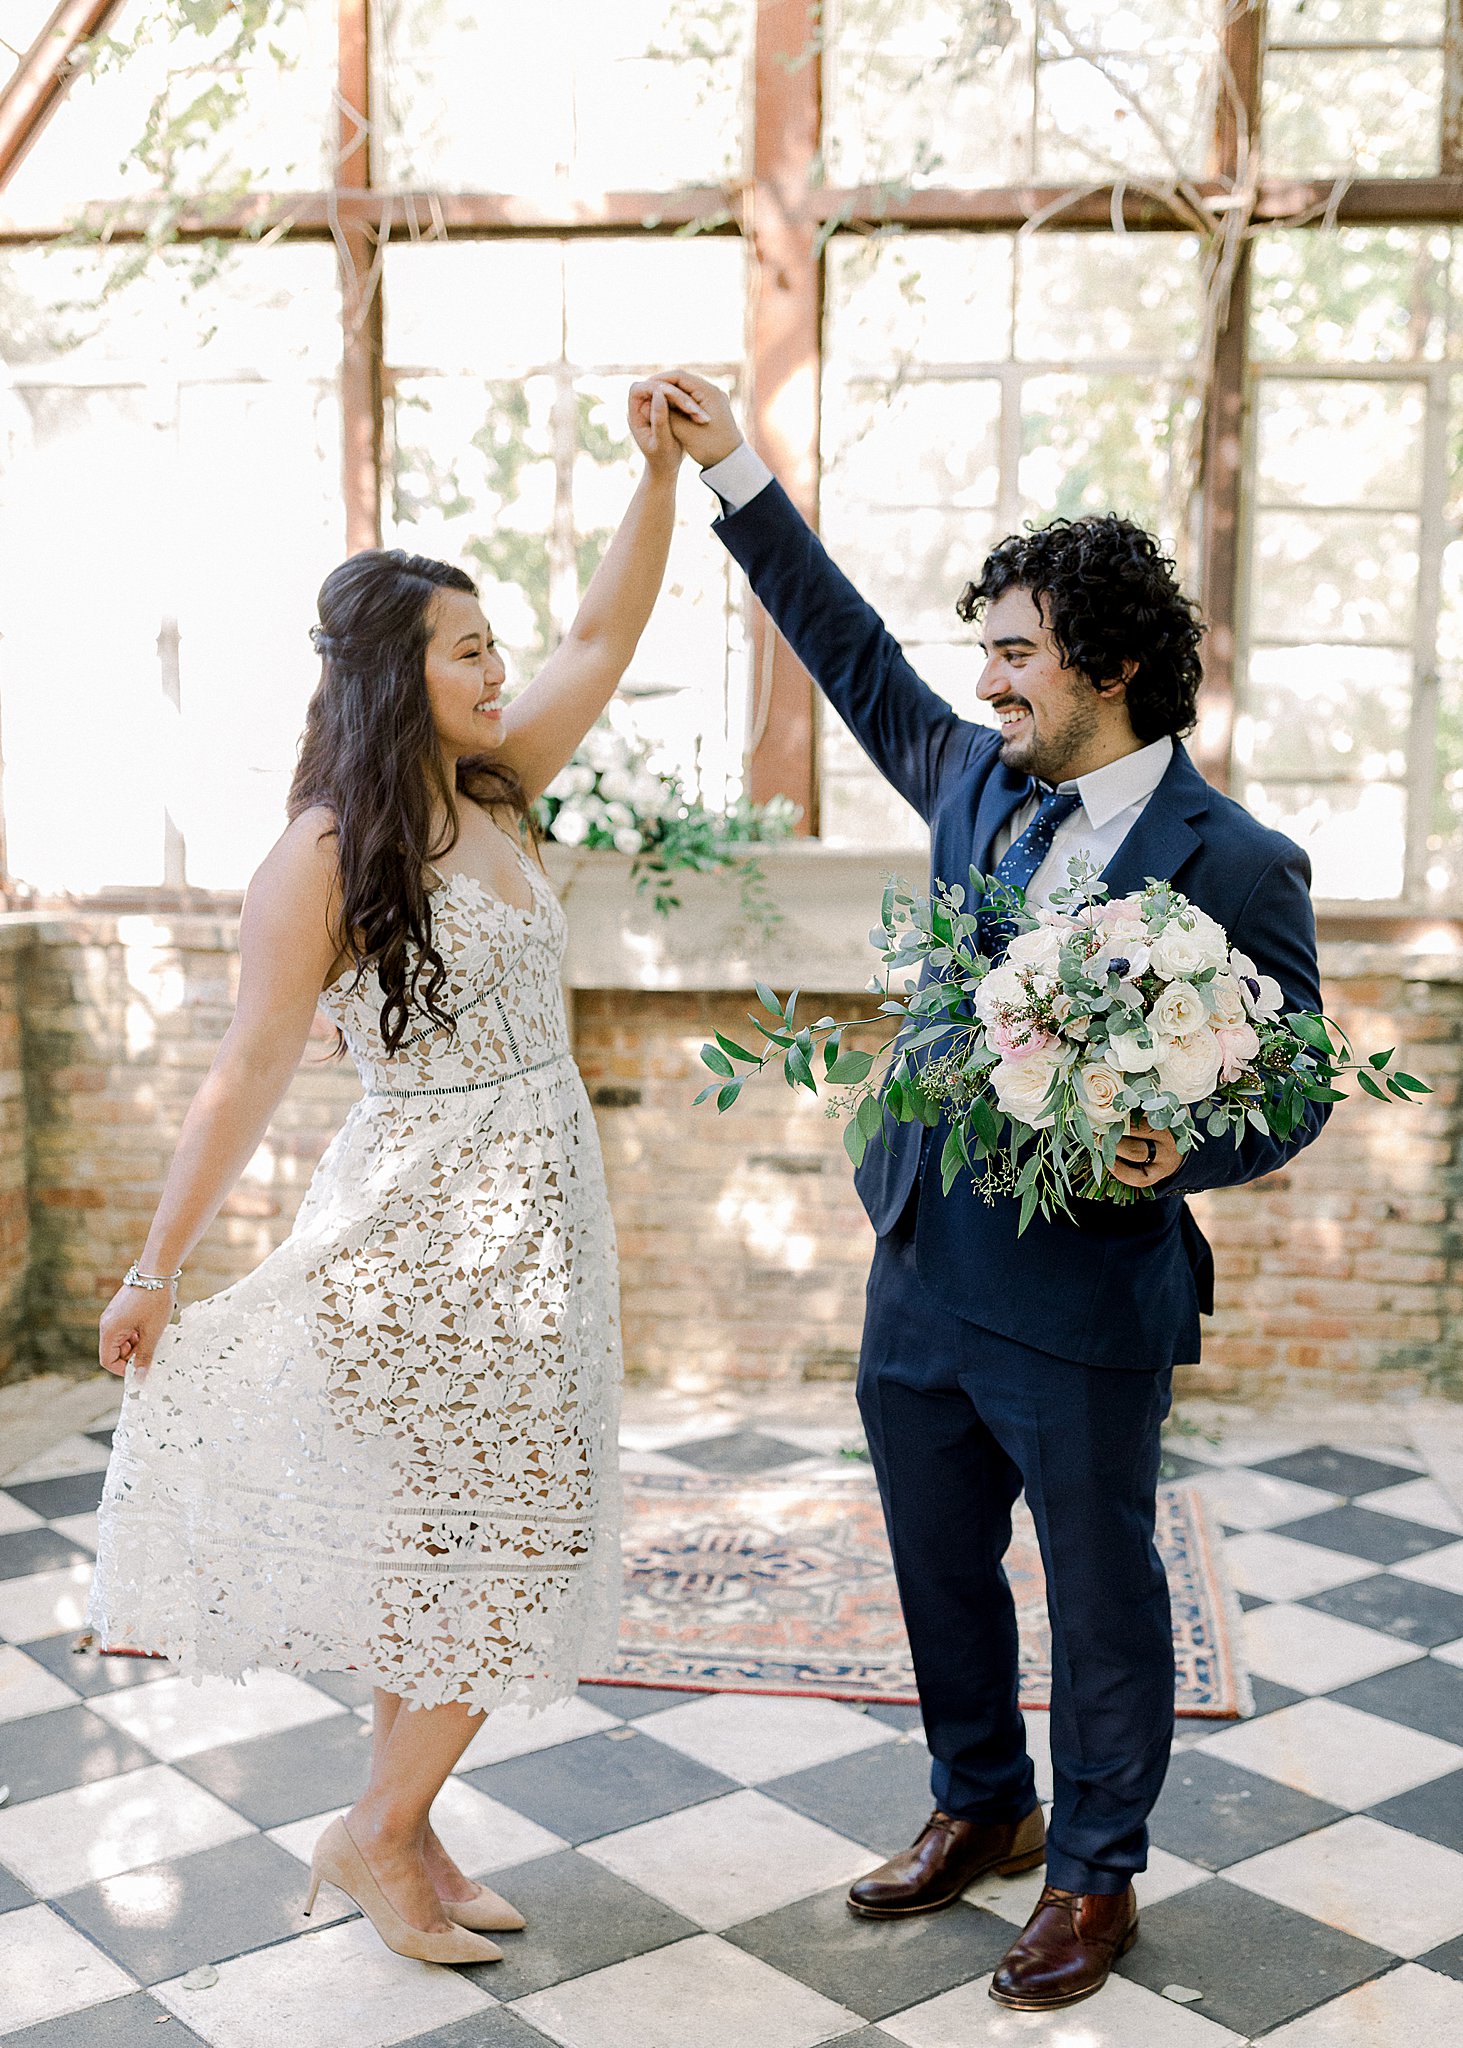 Just Married at Sekrit Theater, Minimony, Anna Kay Photography, Austin Wedding Photographer